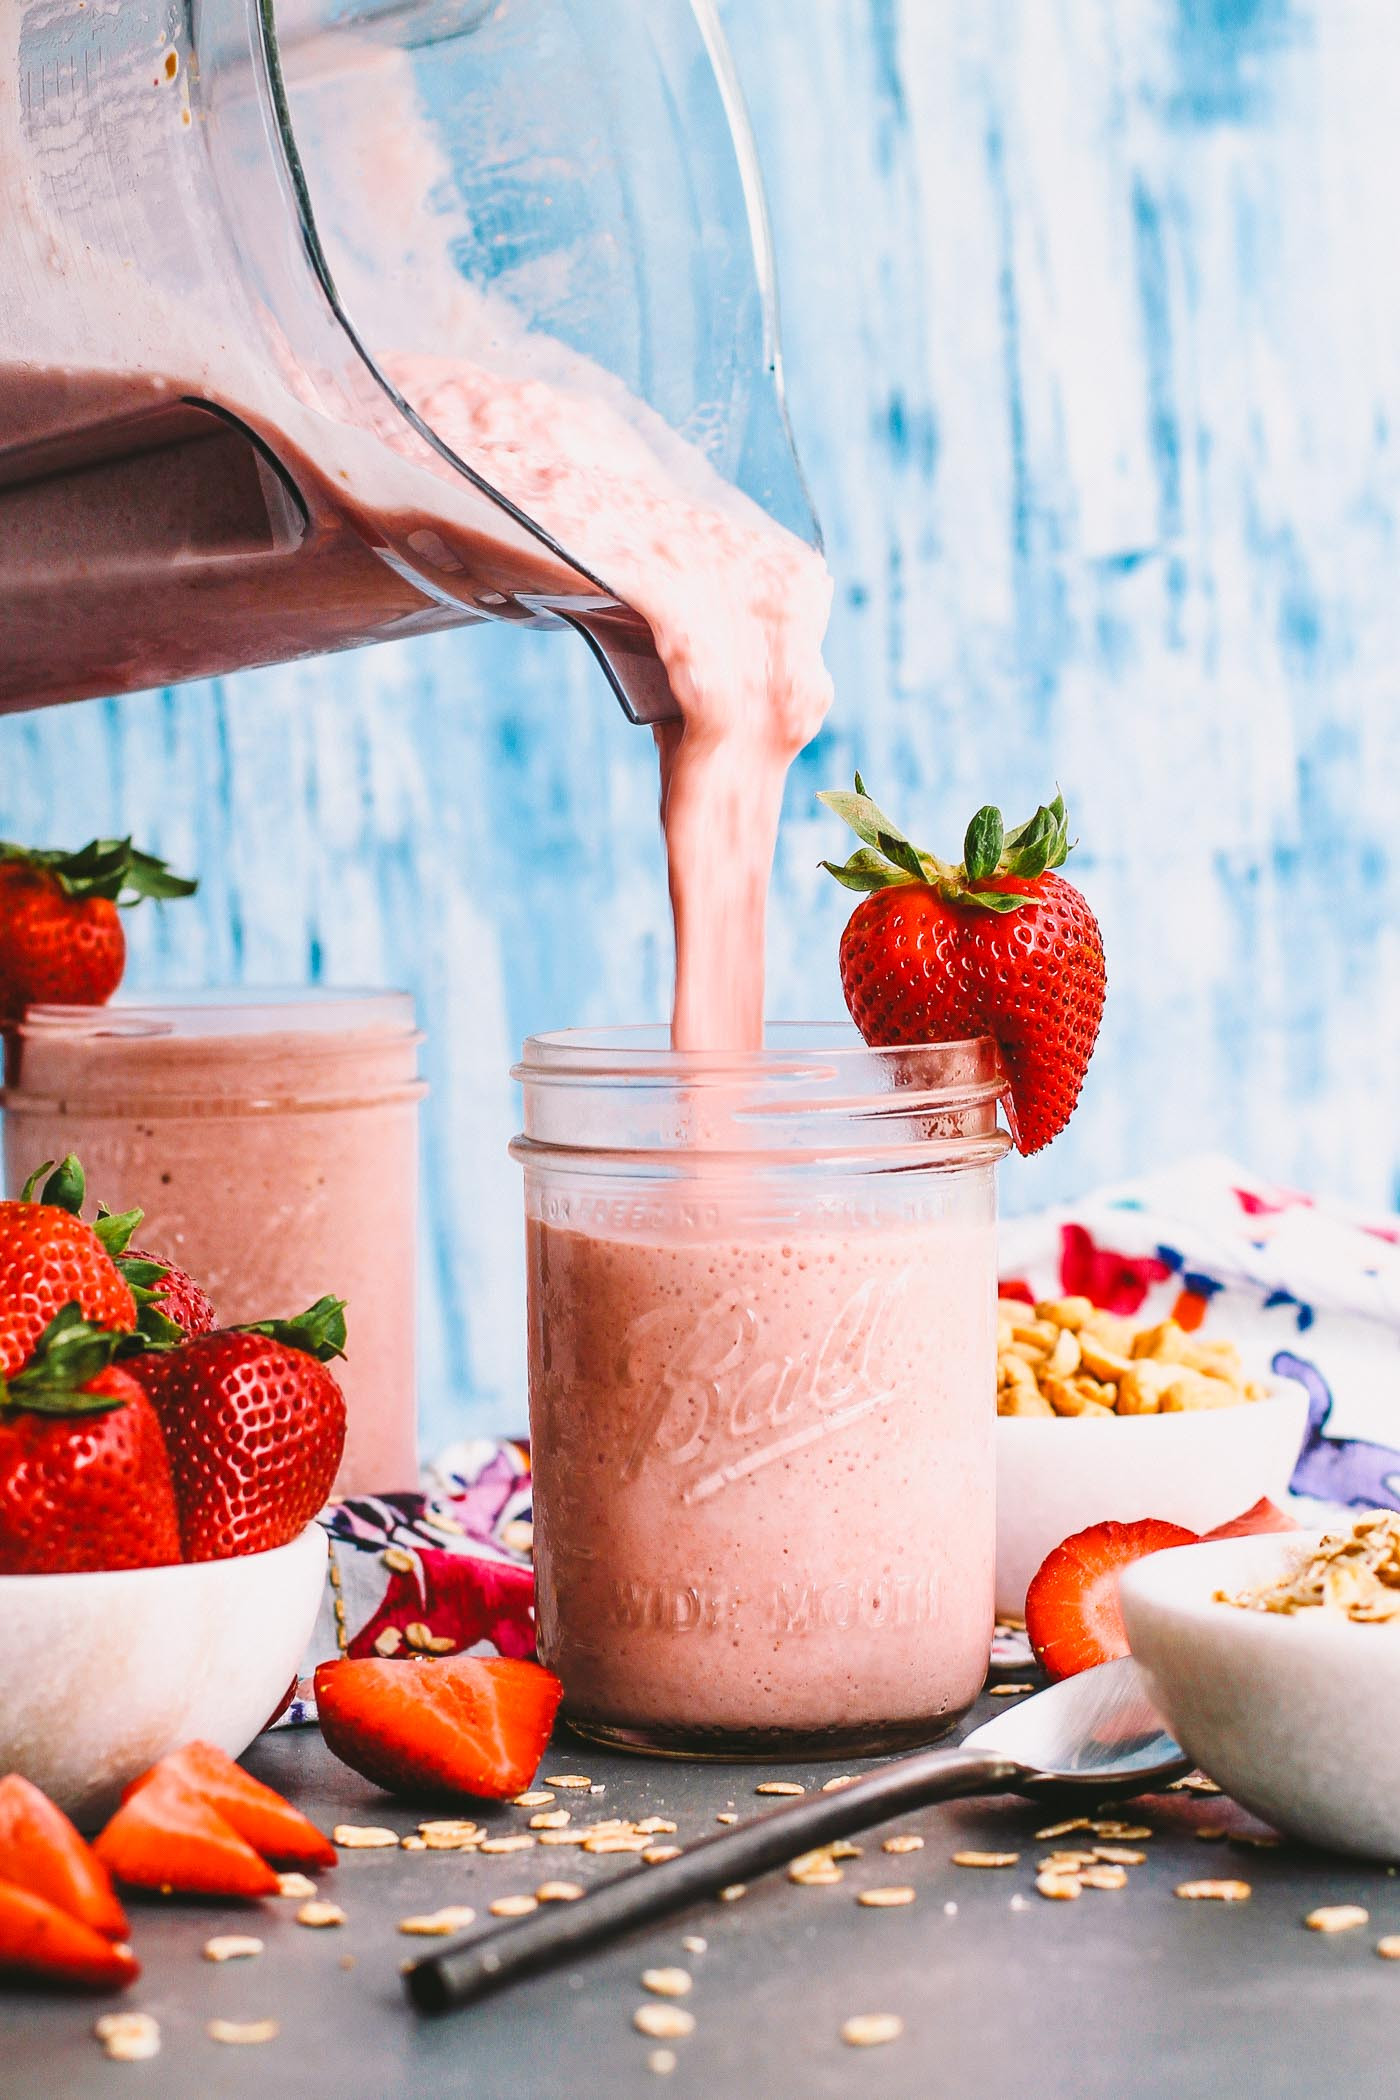 Healthy Smoothies For Breakfast
 strawberry pb&j protein smoothies plays well with butter